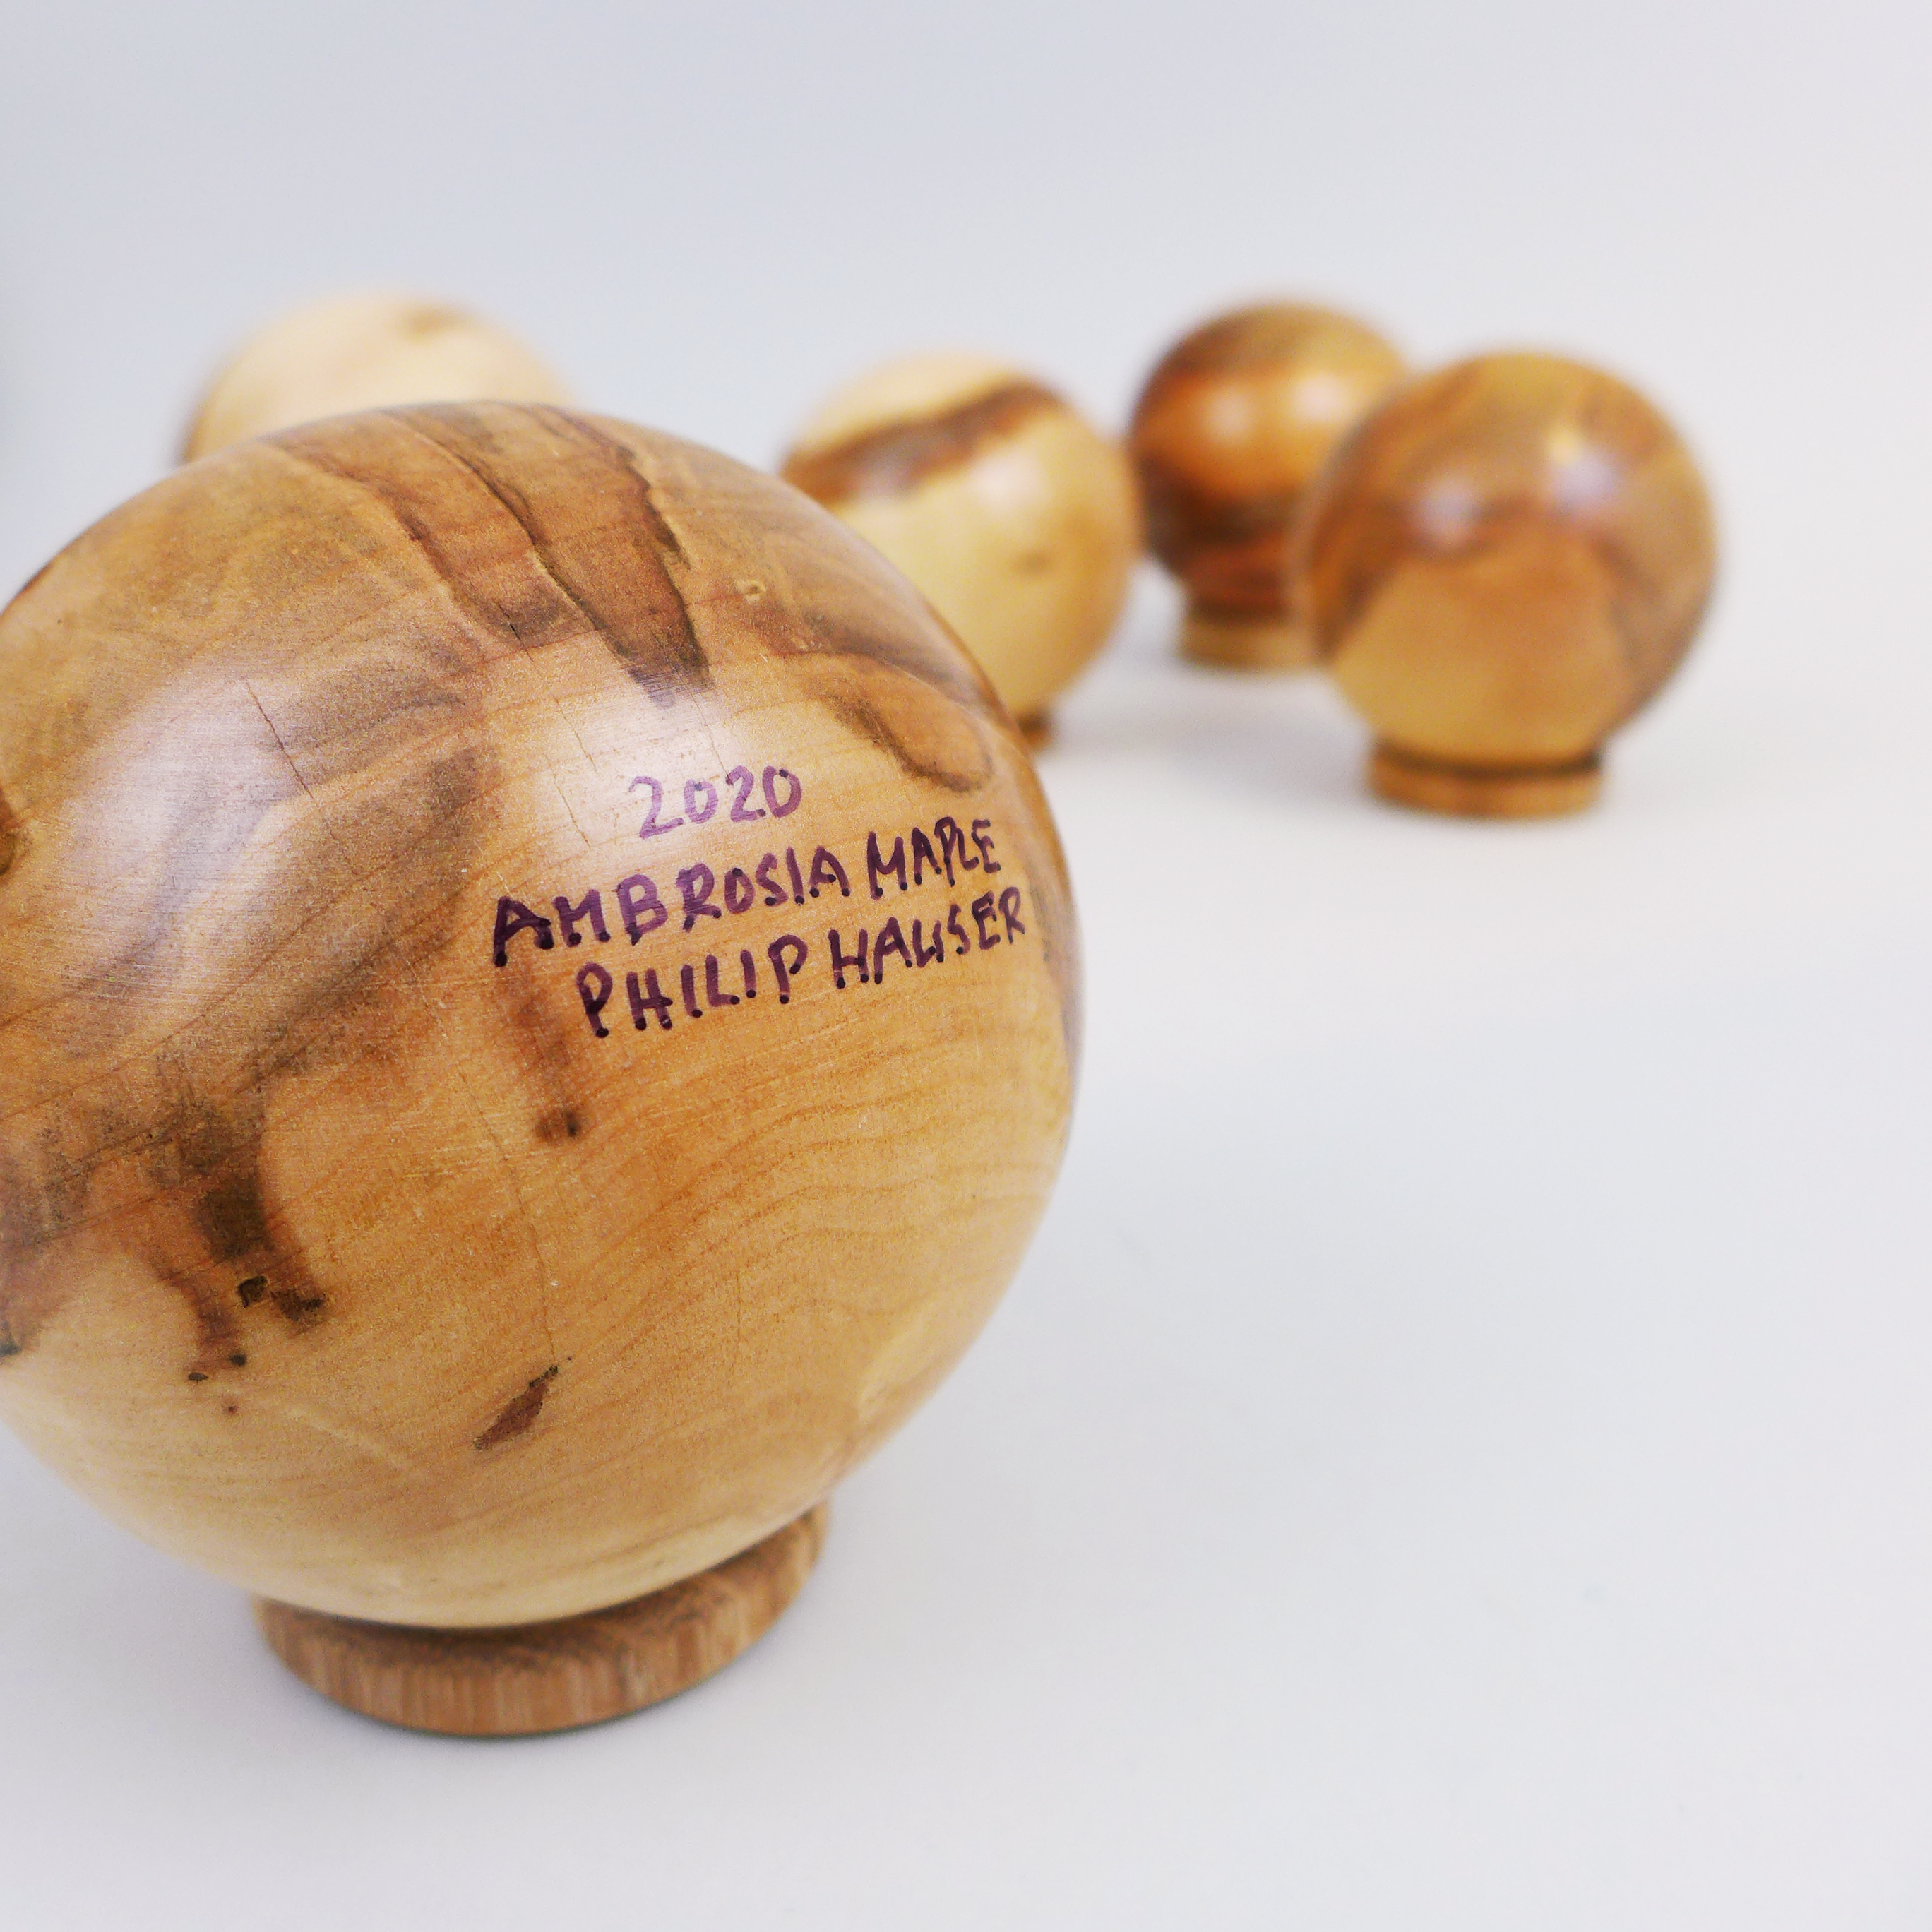 One of a kind wood turned spheres by Philip Hauser at the Center for Art in Wood